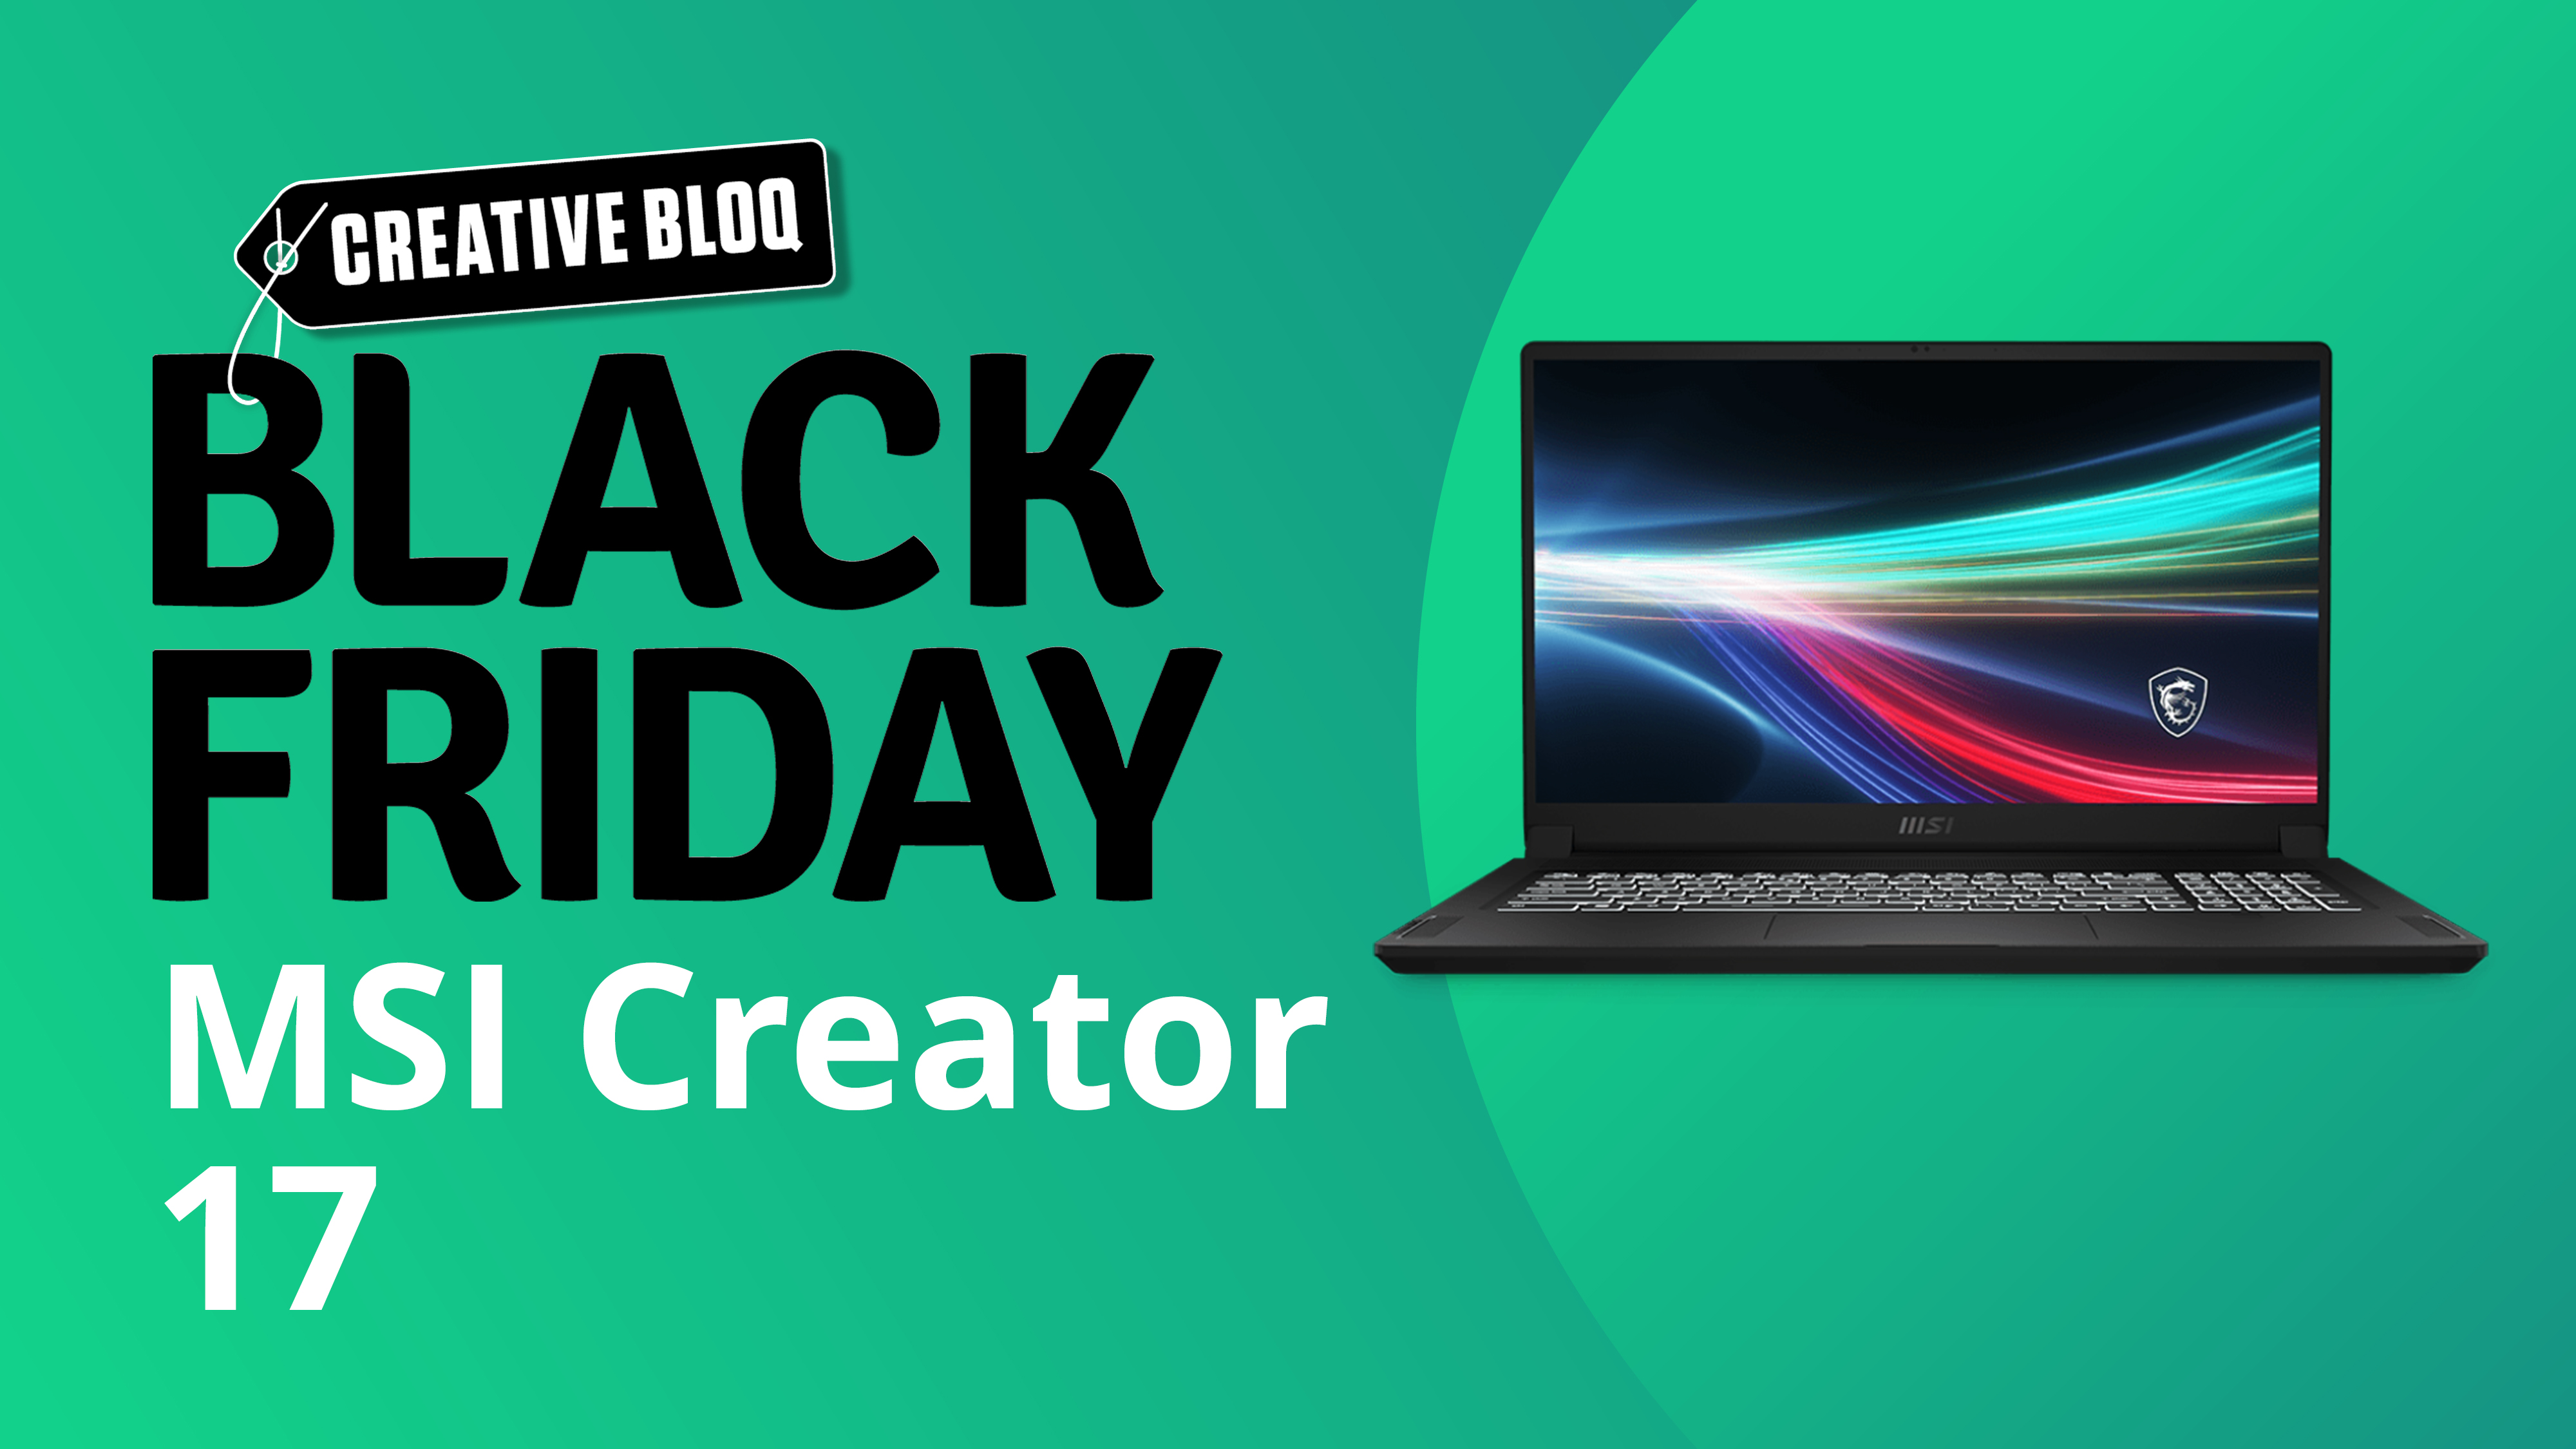 Black Friday laptop deal with Creative Bloq Black Friday MSI Creator 17 text image next to an image of a laptop on a green background